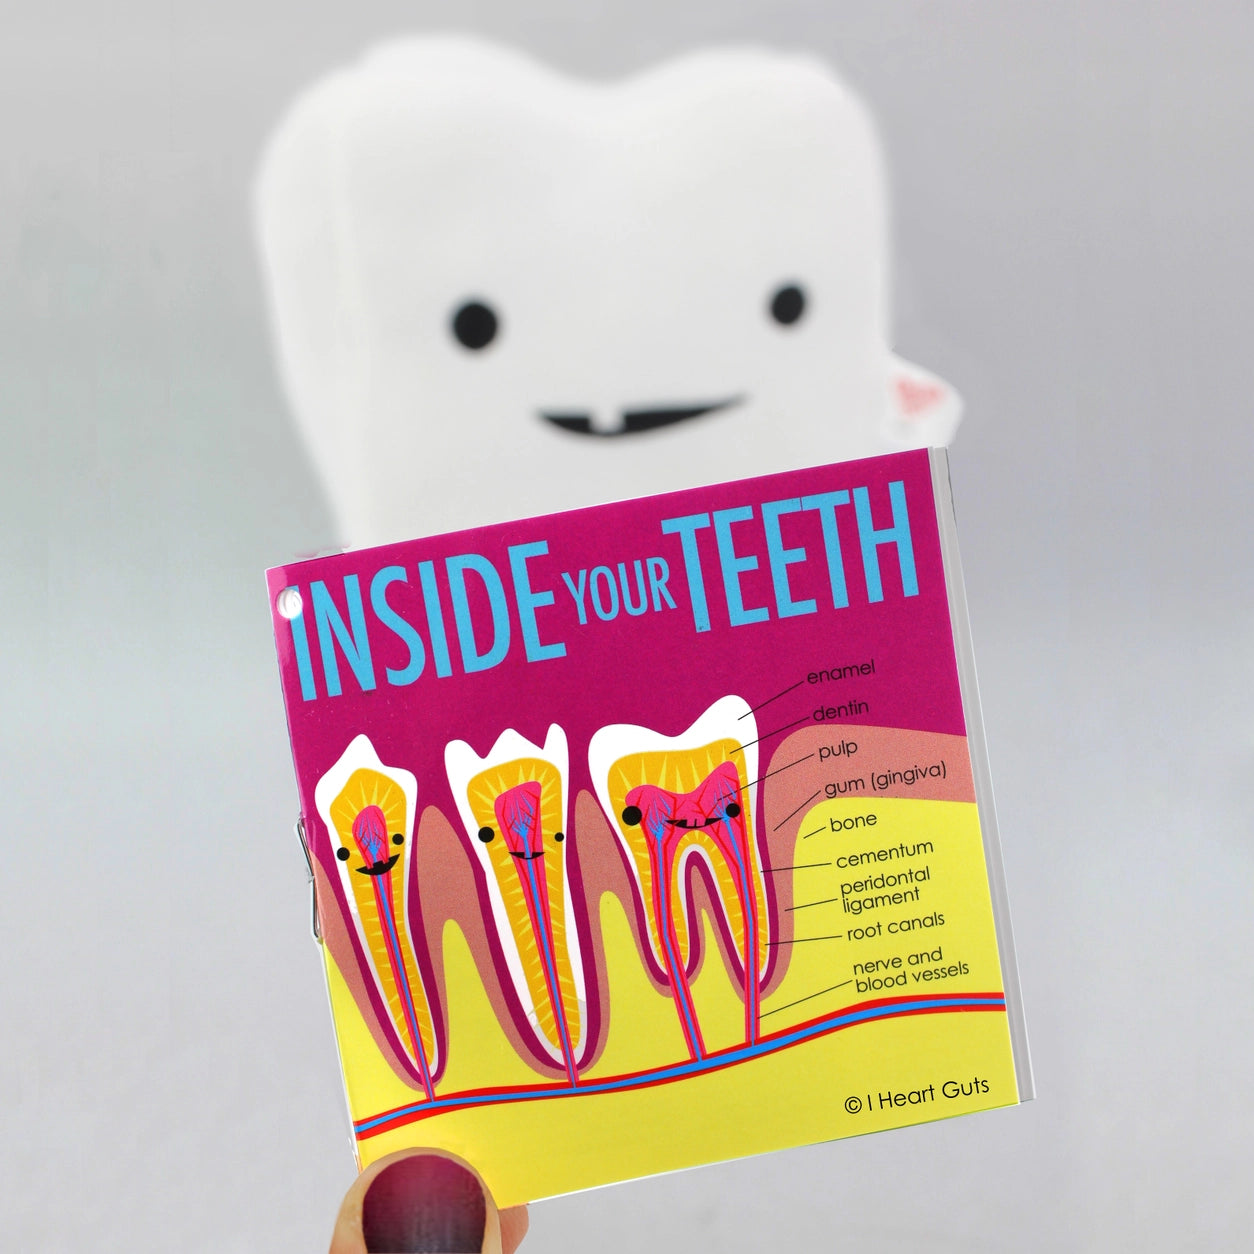 plushie tooth - You can't handle the tooth!